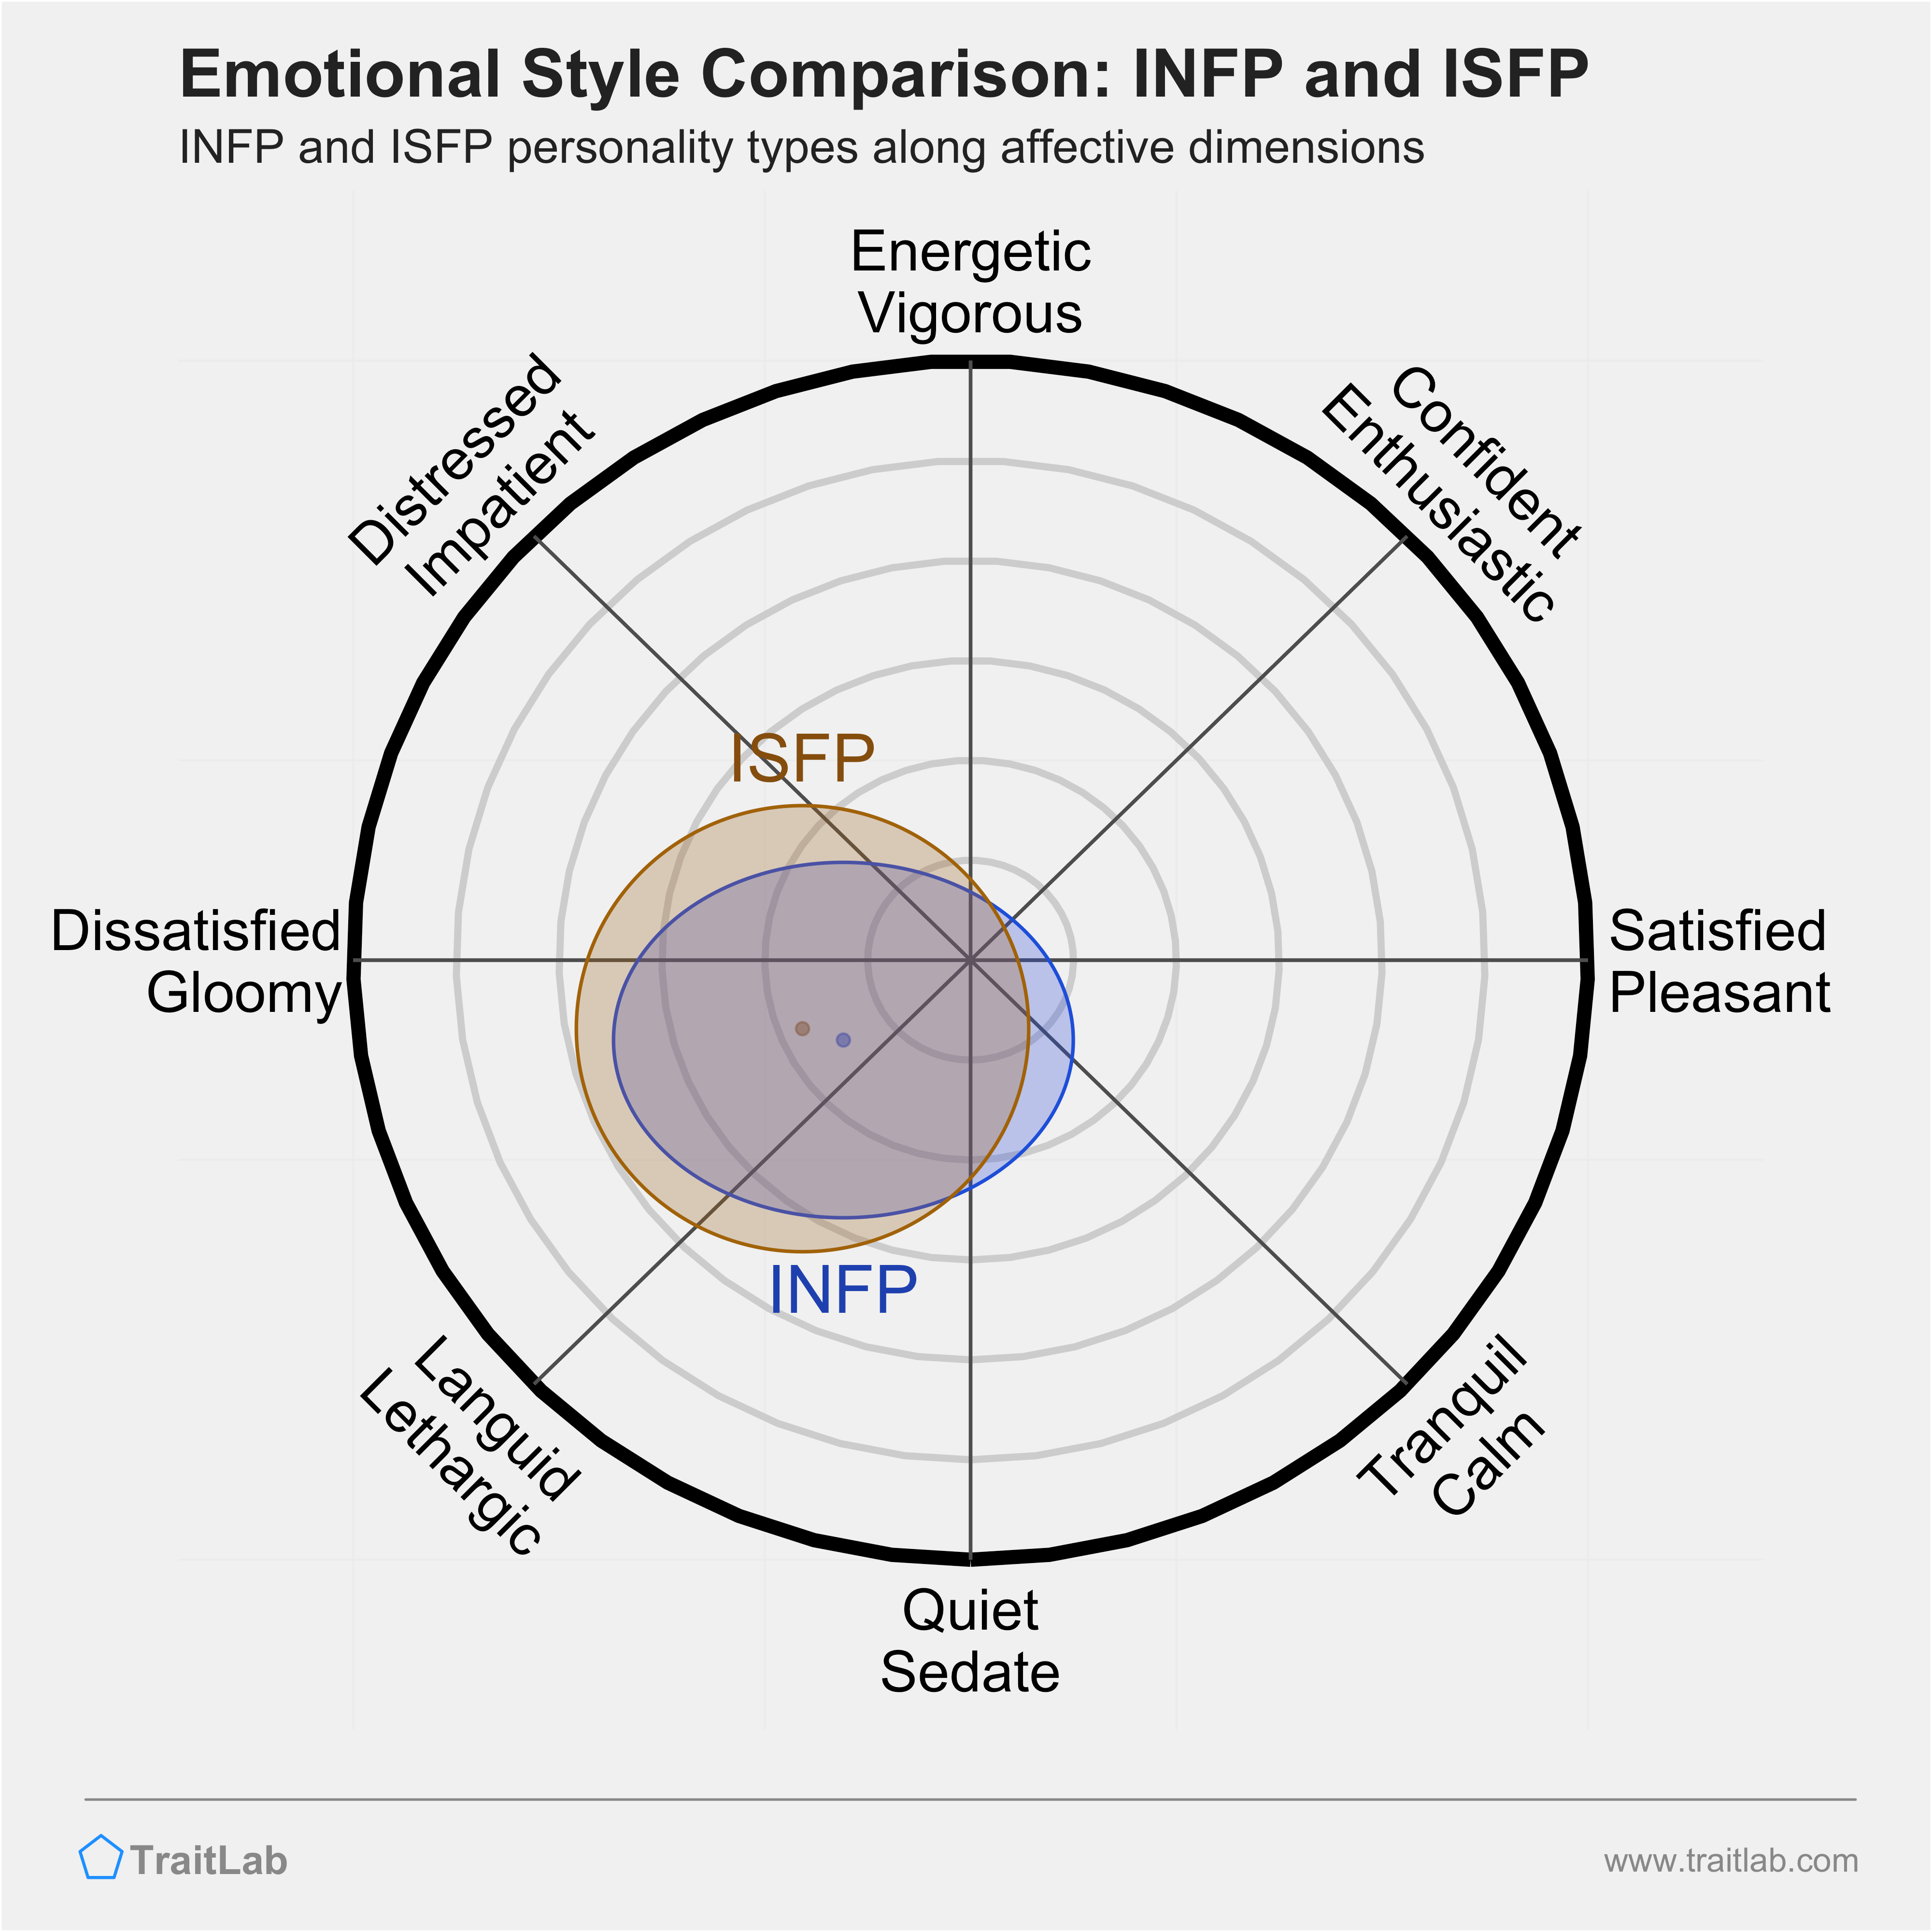 INFP and ISFP comparison across emotional (affective) dimensions